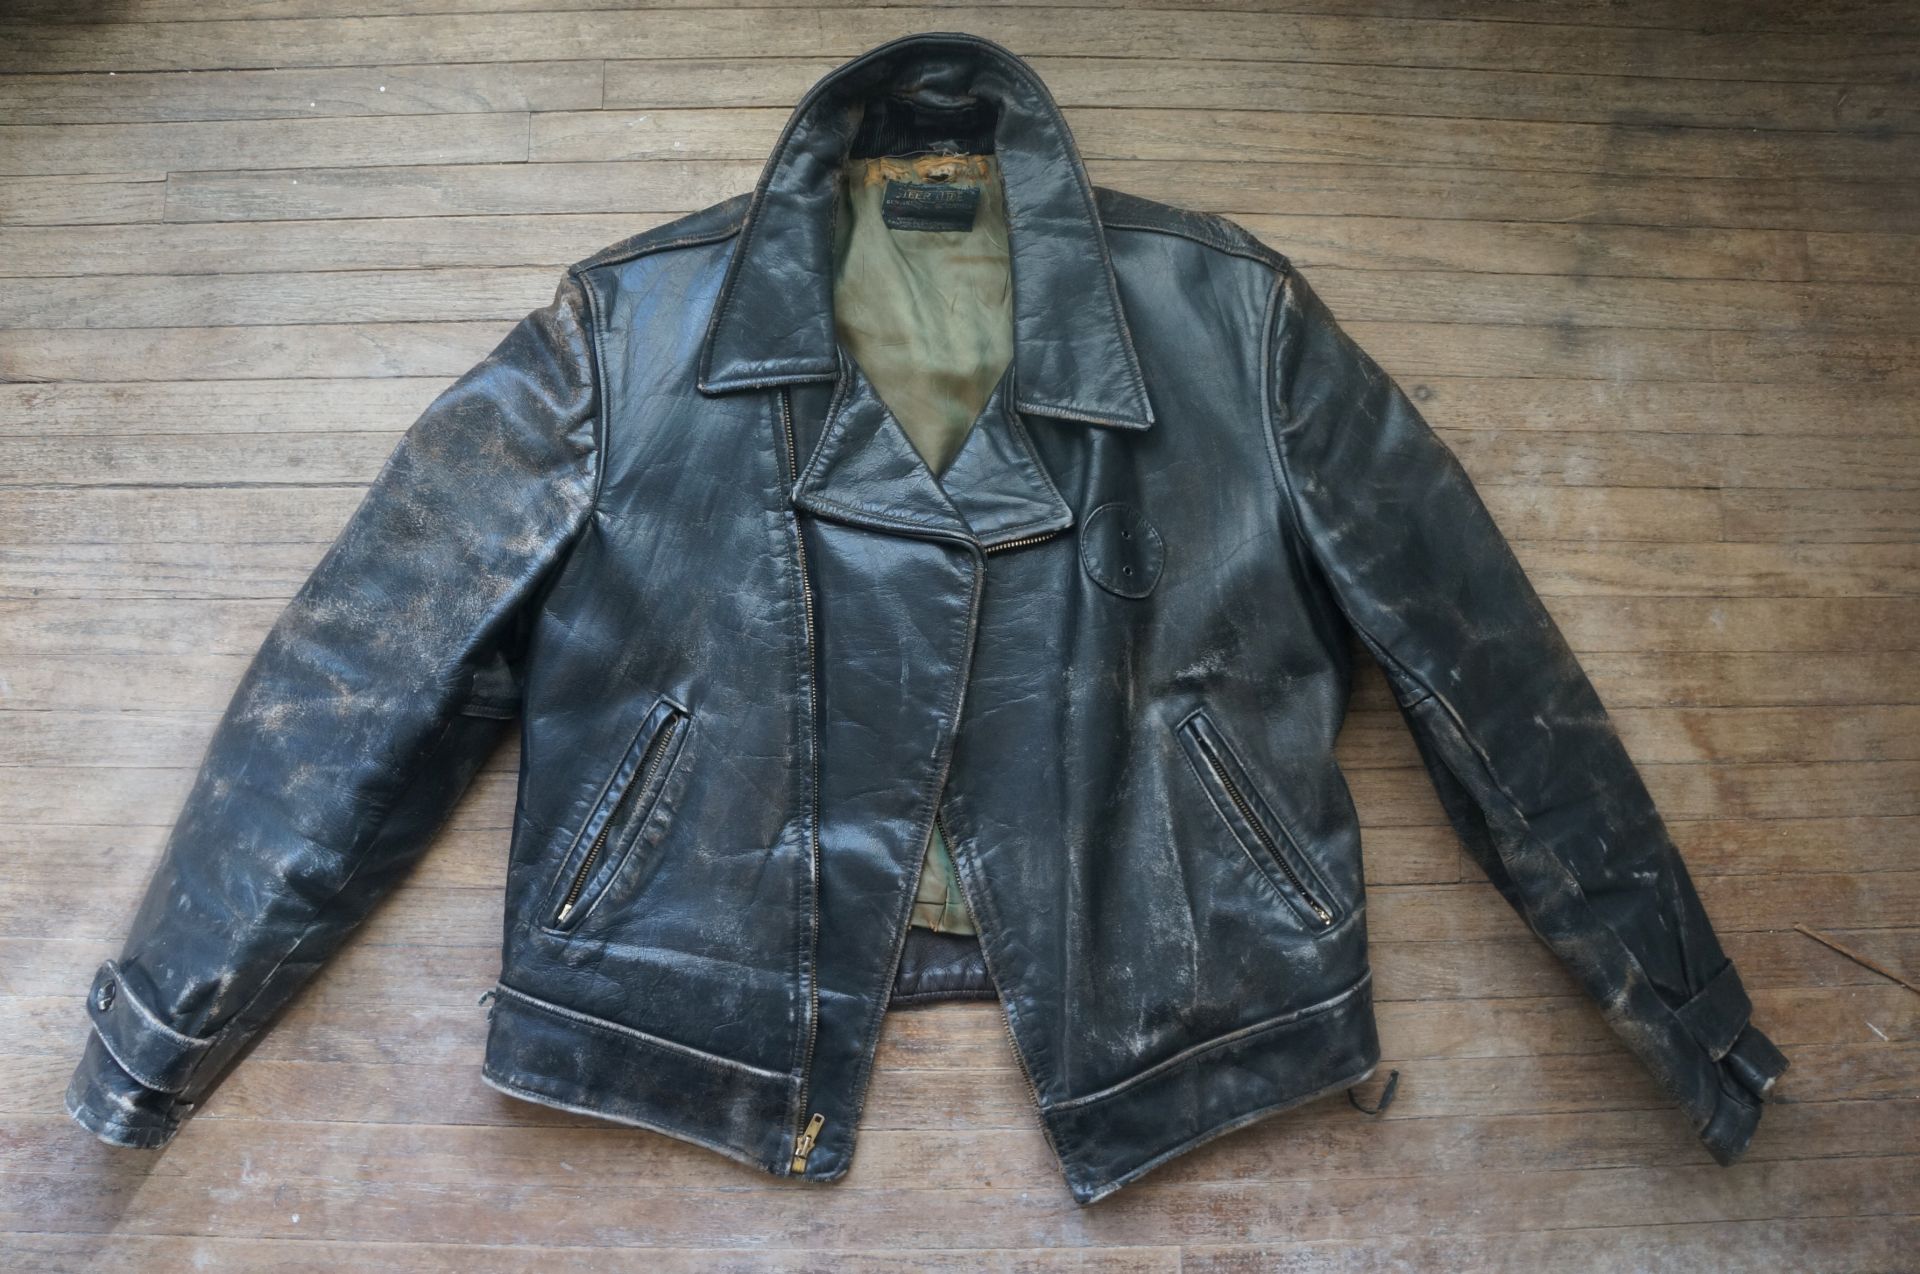 What will black leather look like when distressed and worn in? | The ...